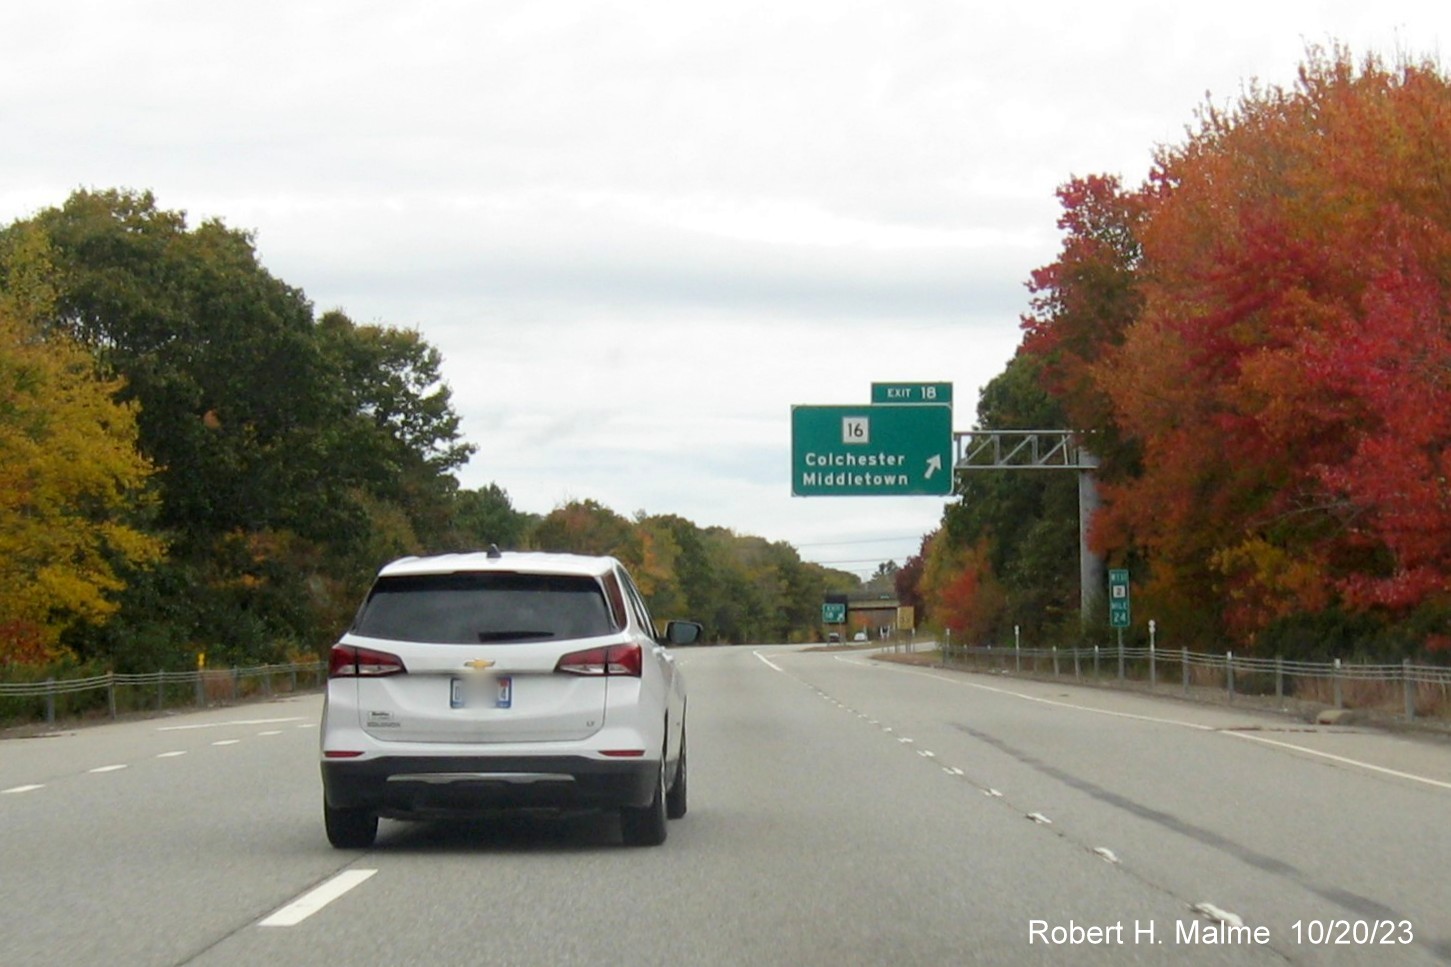 Image of previously placed overhead ramp sign for CT 16 exit on CT 2 West in Colchester, October 2023